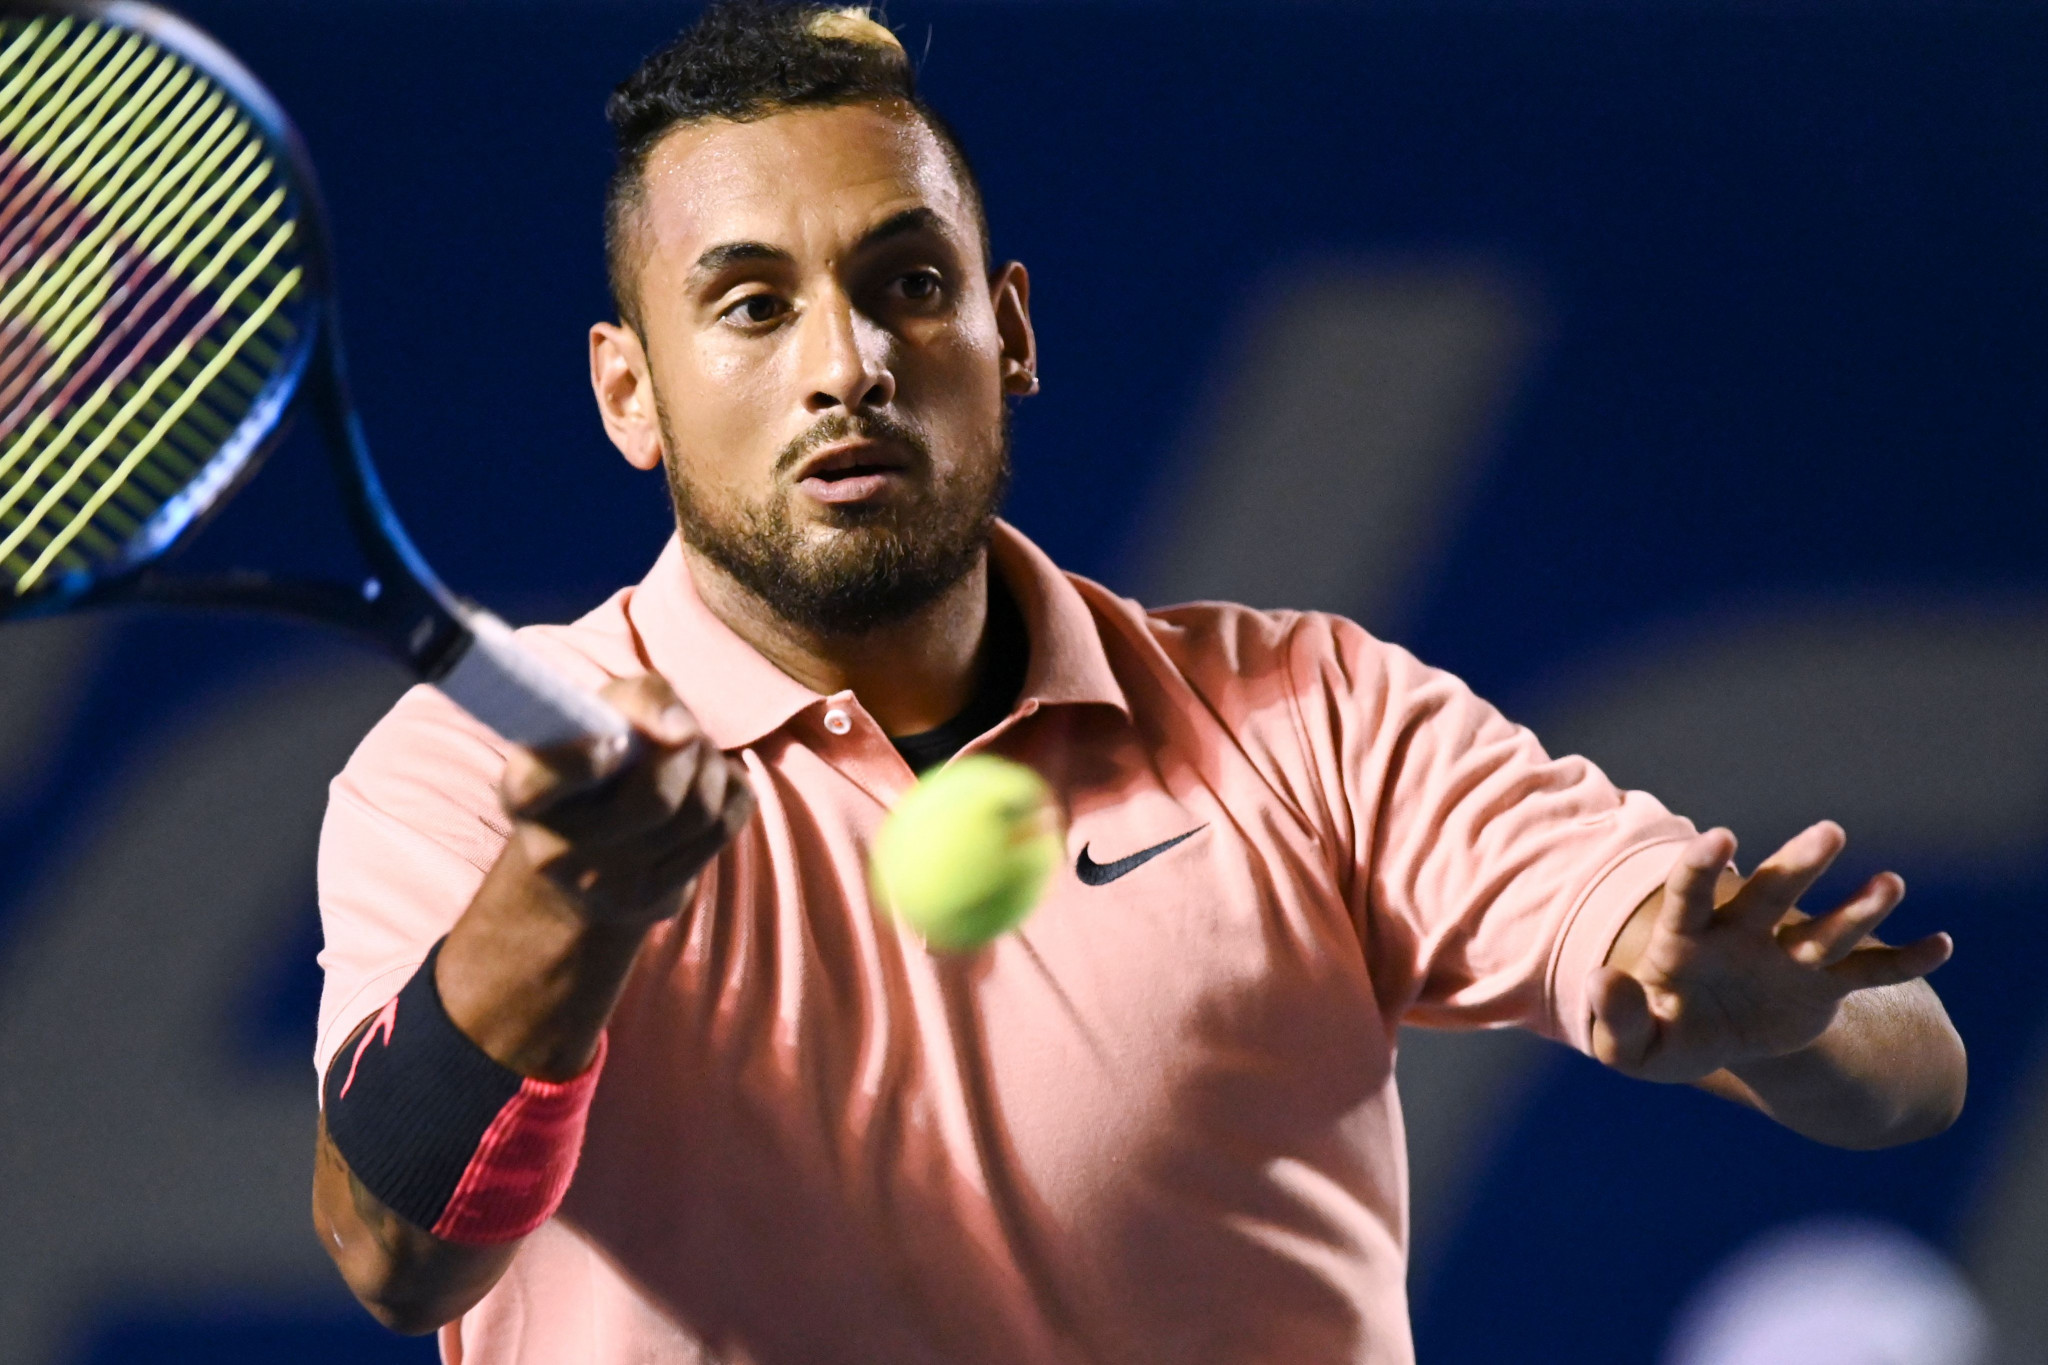 Australian Nick Kyrgios has become the latest tennis player to withdraw from the US Open due to the coronavirus pandemic ©Getty Images